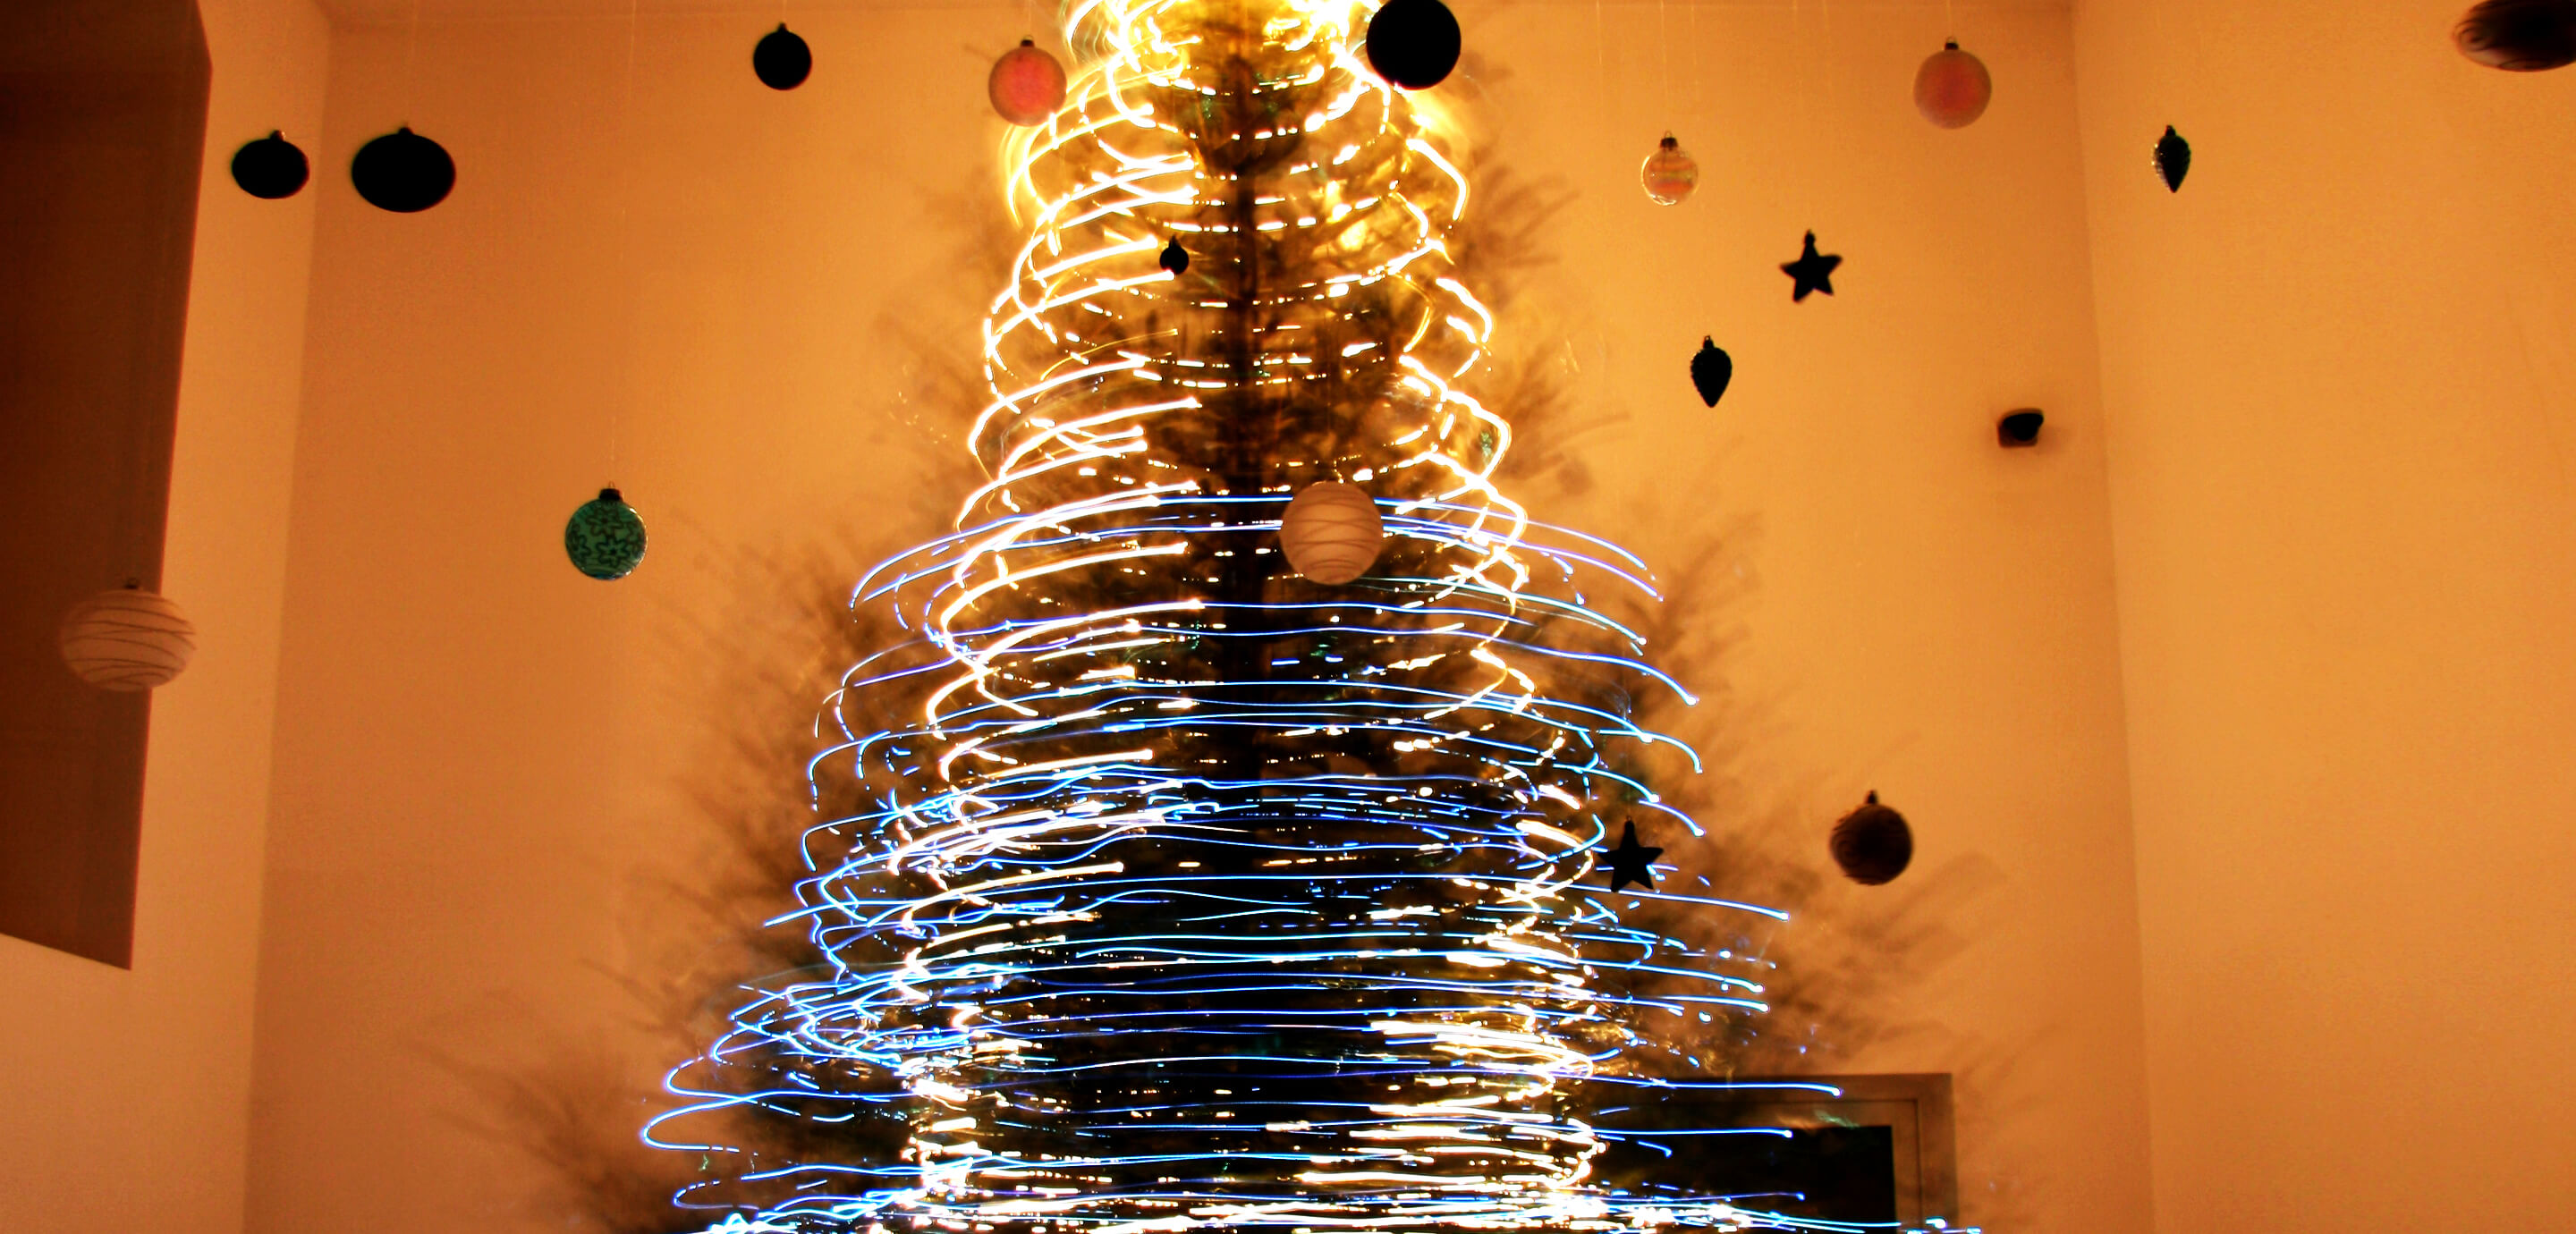 Office - Mures - Christmas idea - spinning the tree 360 degrees to get the light effect